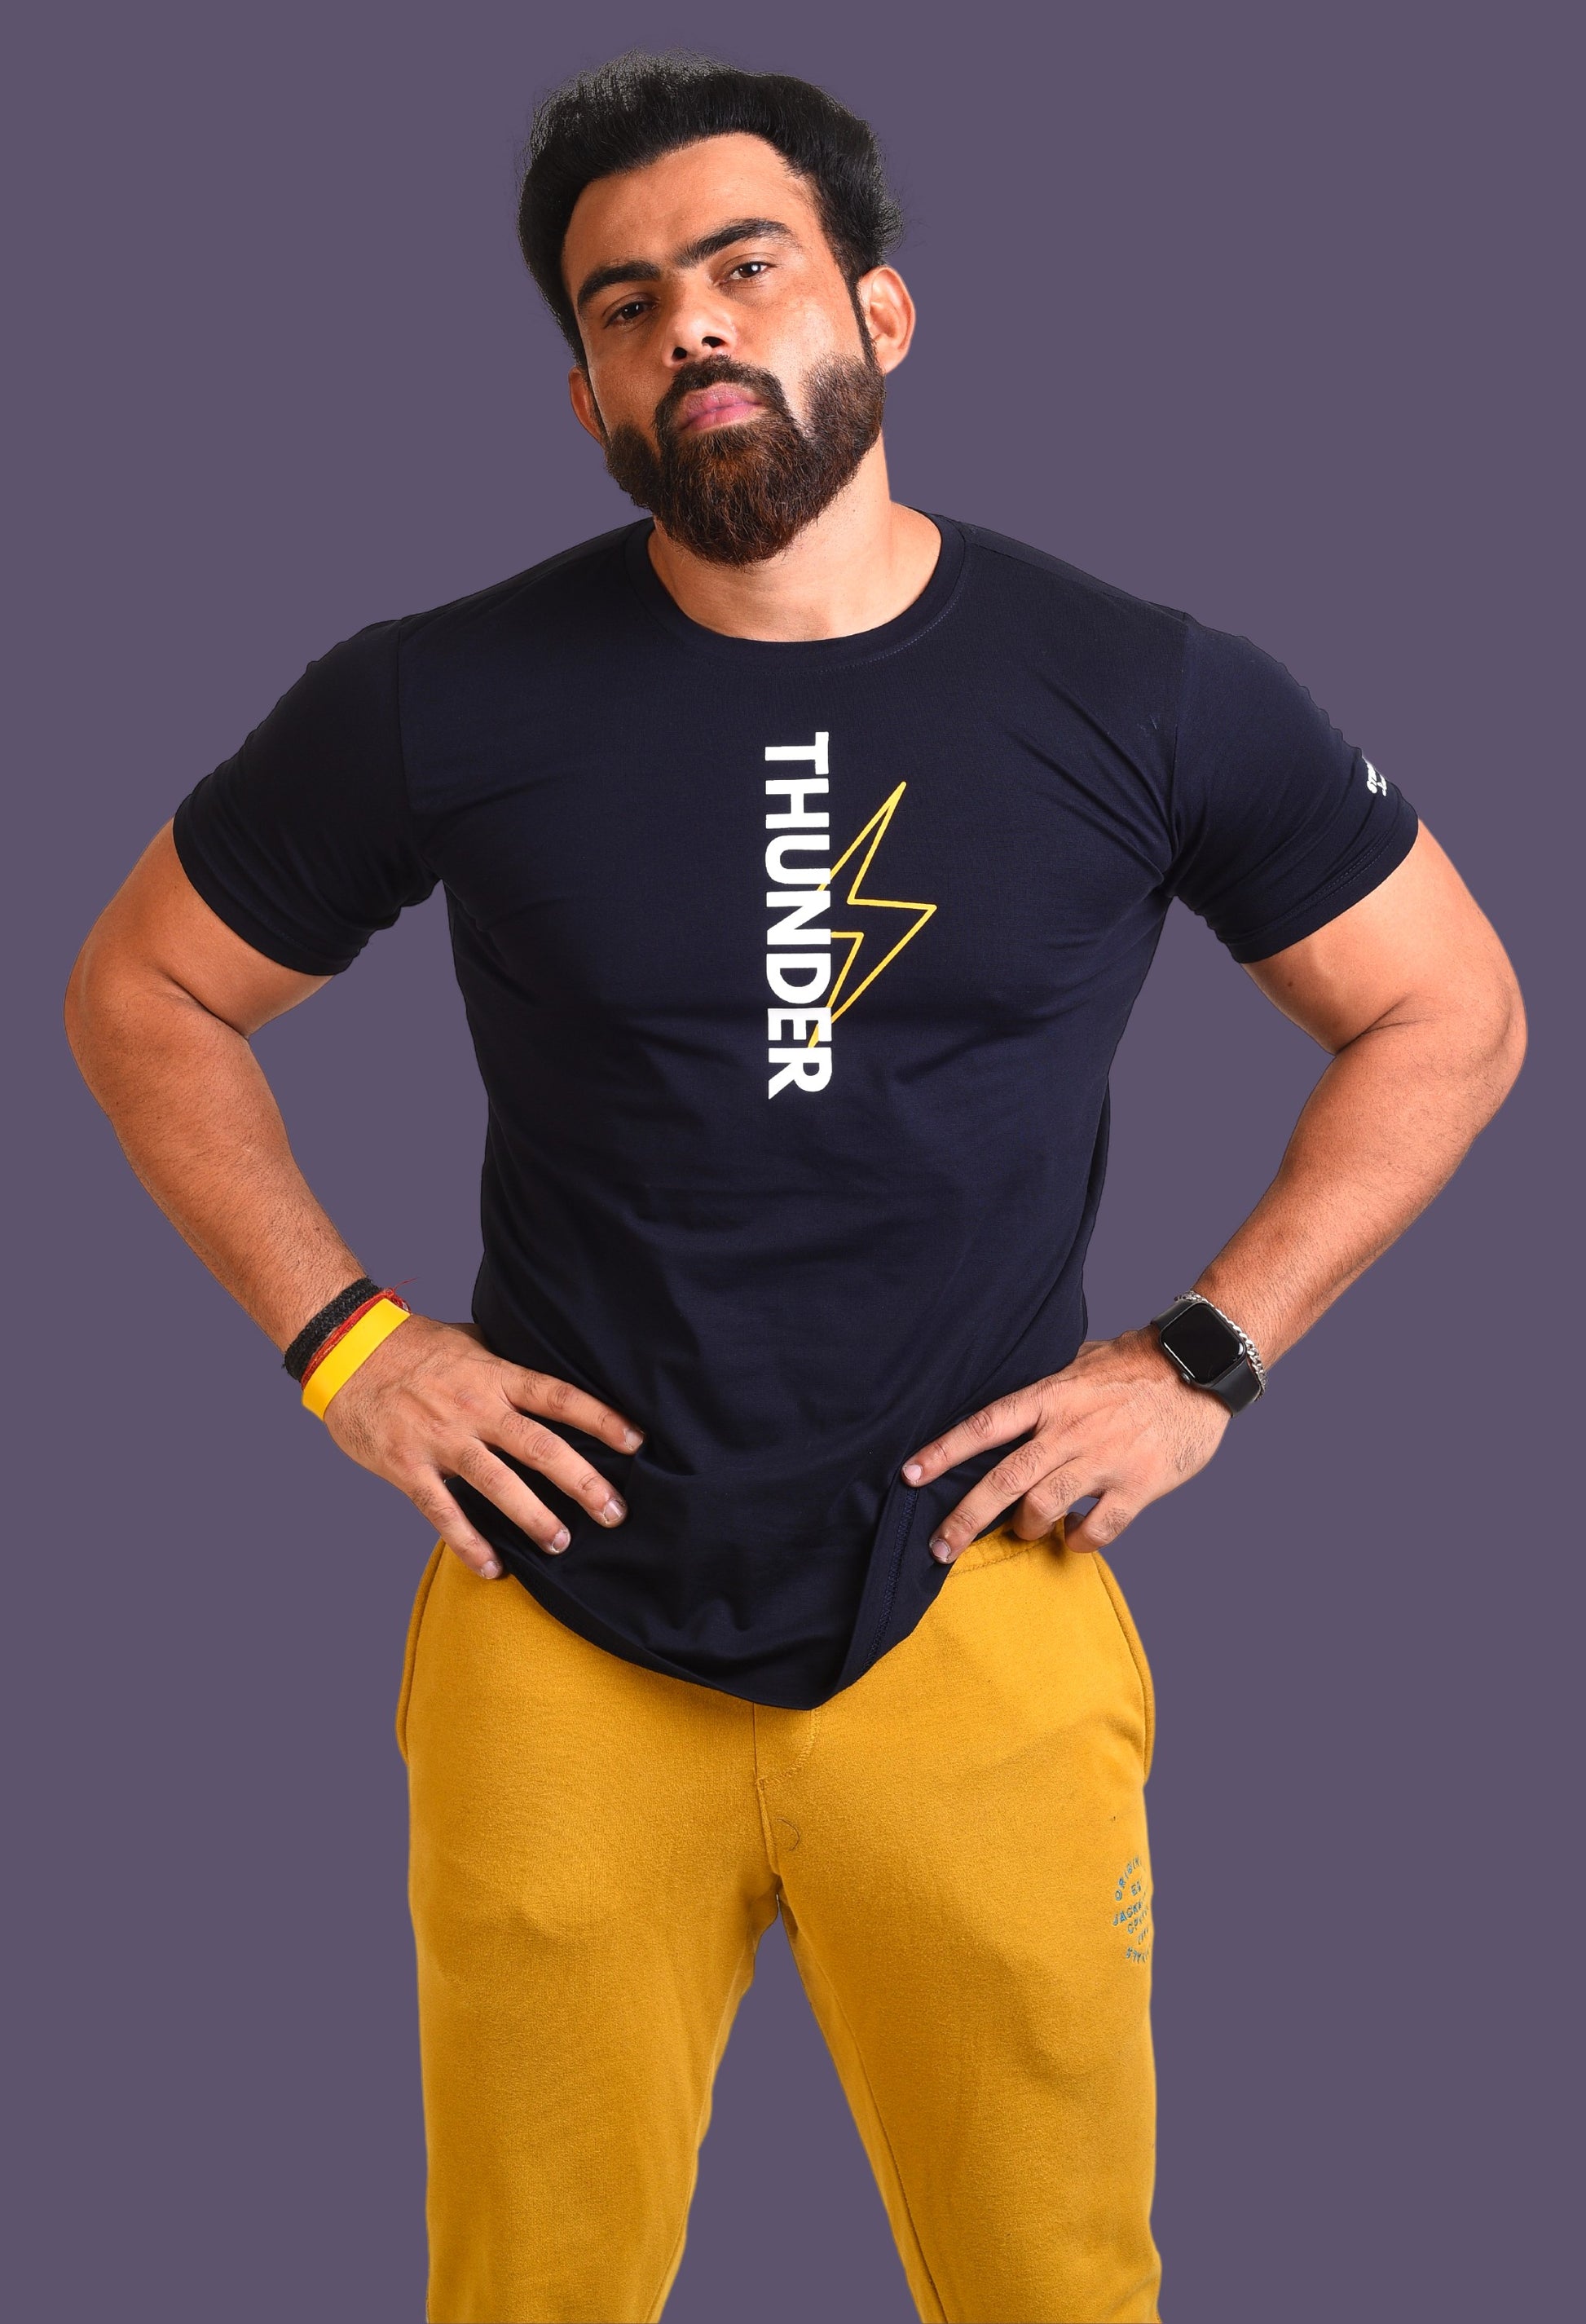 Gym T Shirt - Thunder - Men T-Shirt with premium cotton Lycra. The Sports T Shirt by Strong Soul